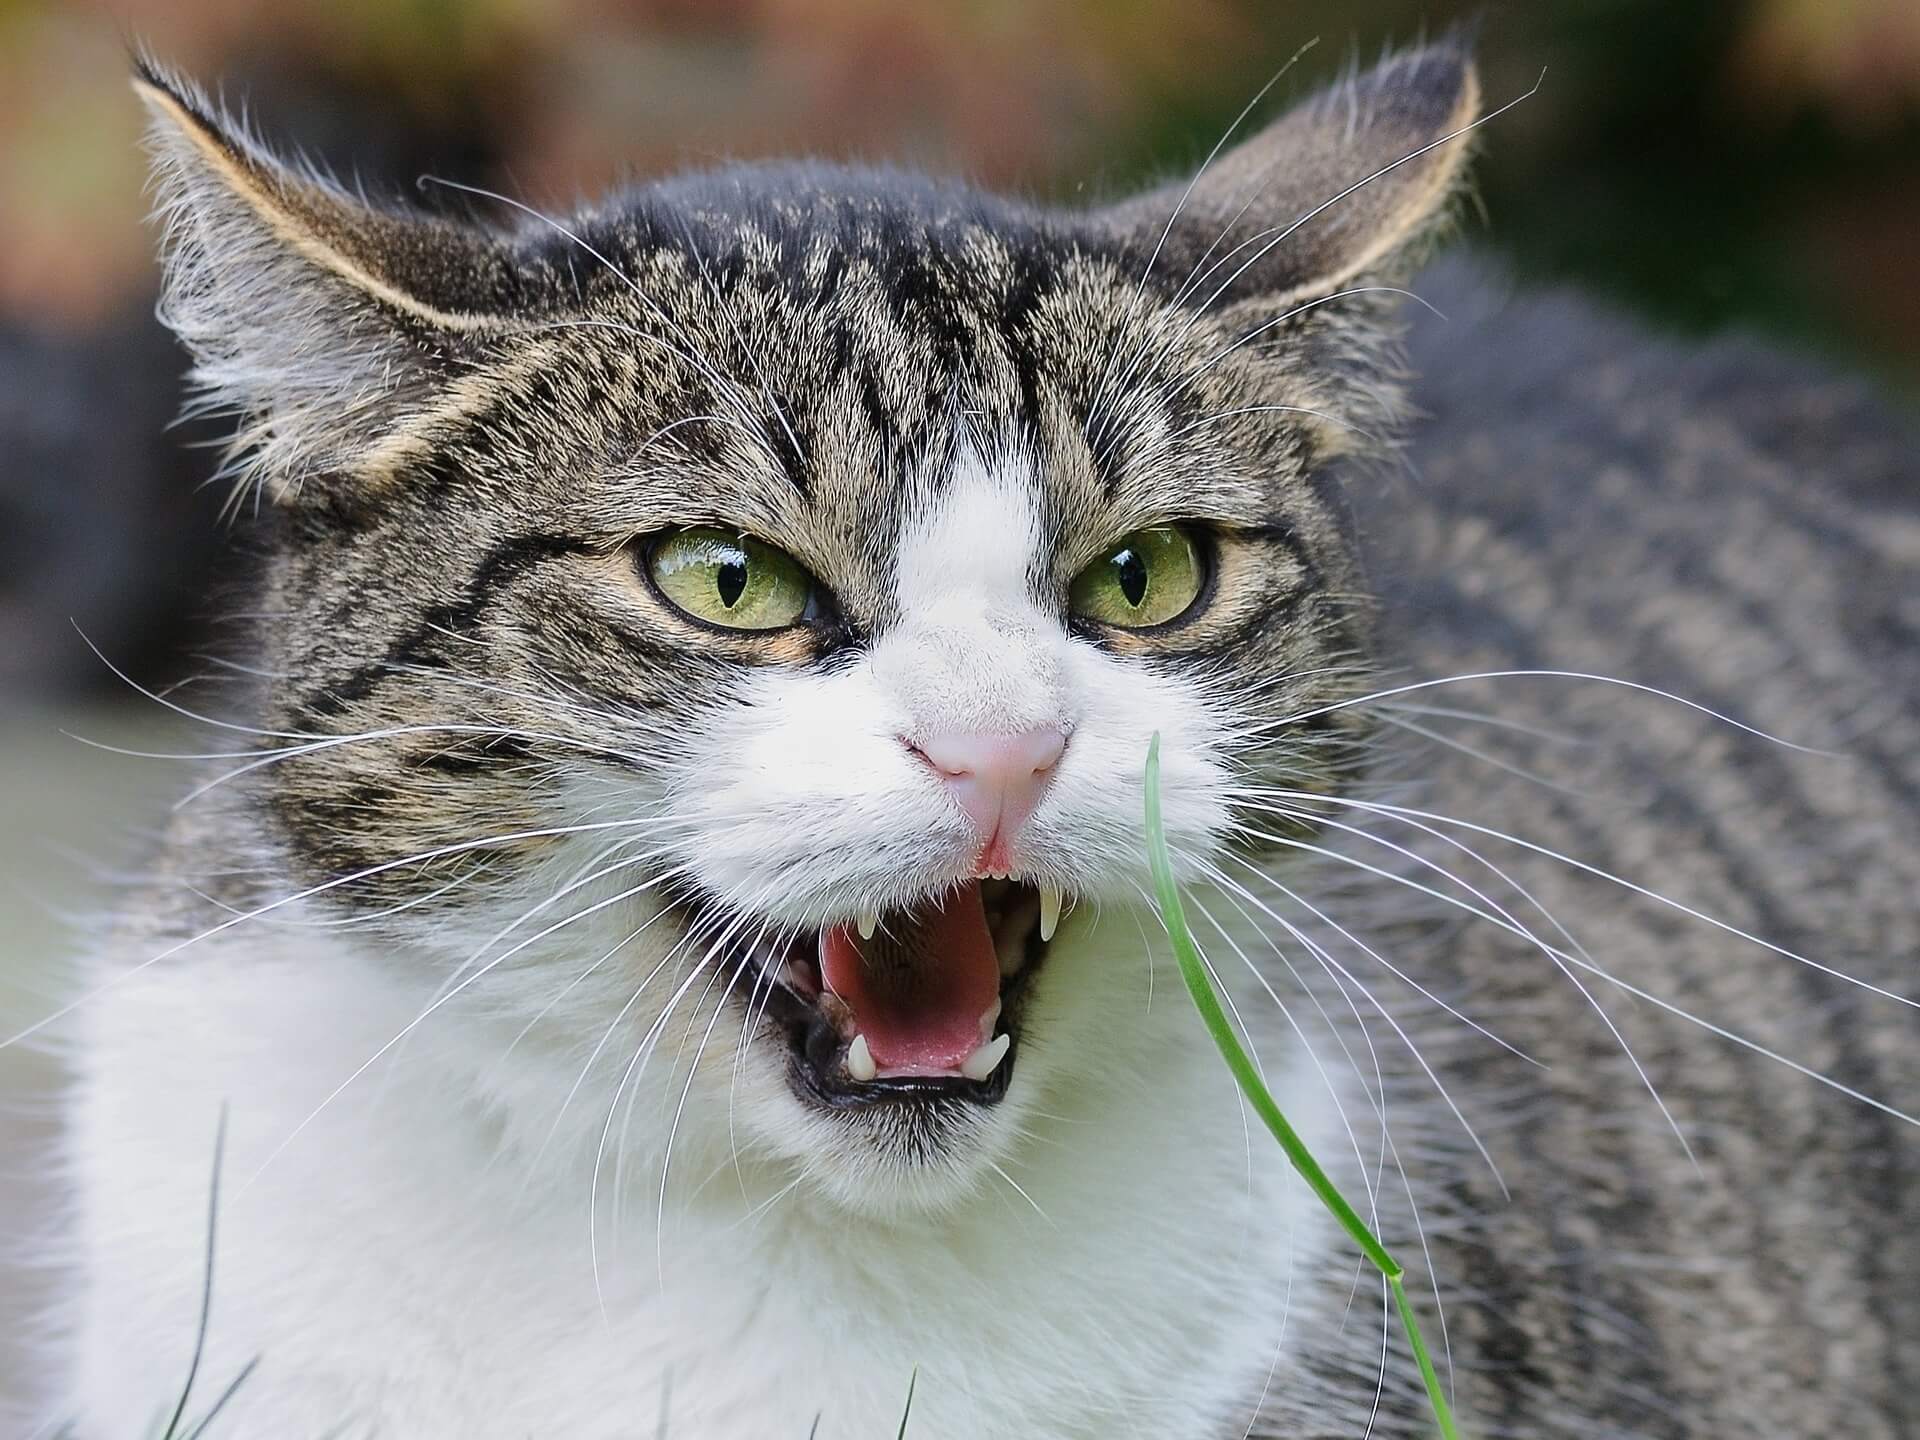 Cats Hissing at New Kitten: How to be Prepared